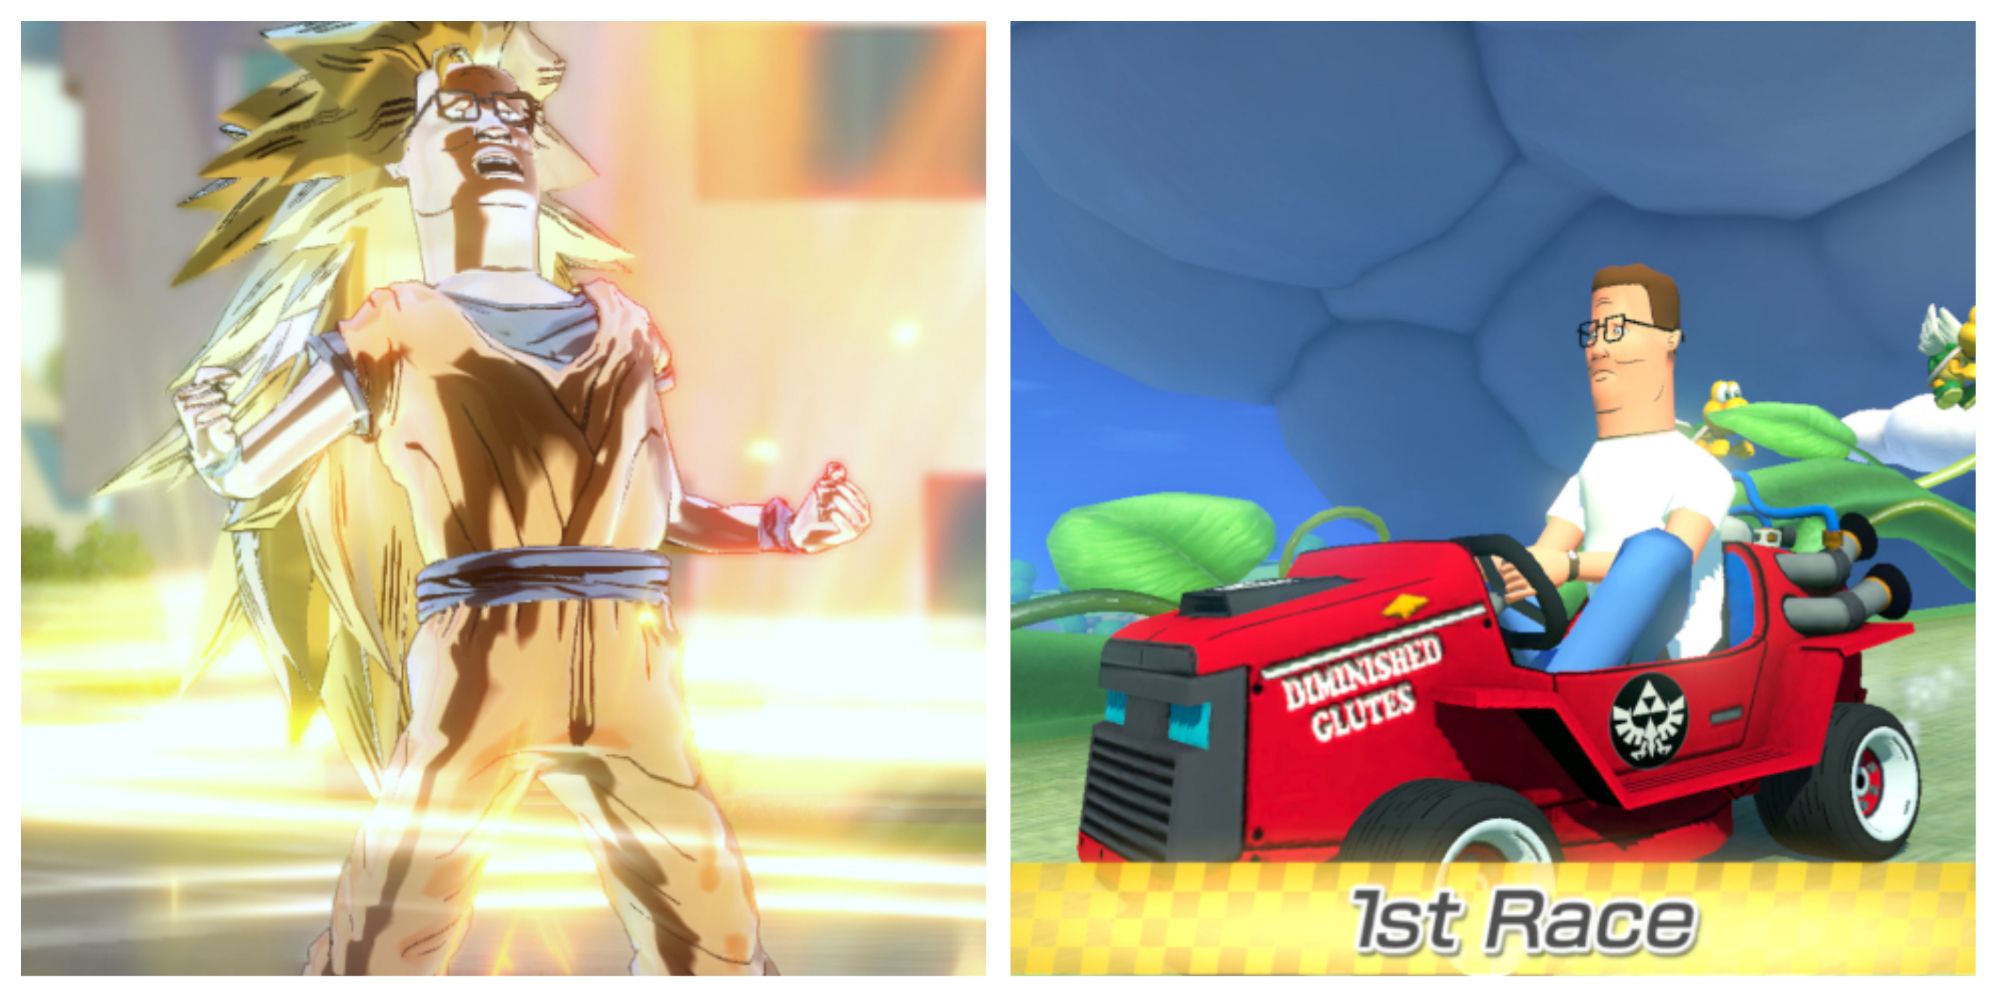 Left: Hank Hill as Super Saiyan 3. Right: Hank Hill in his lawn mower. Image sources: videogamemods.com and gamebanana.com.